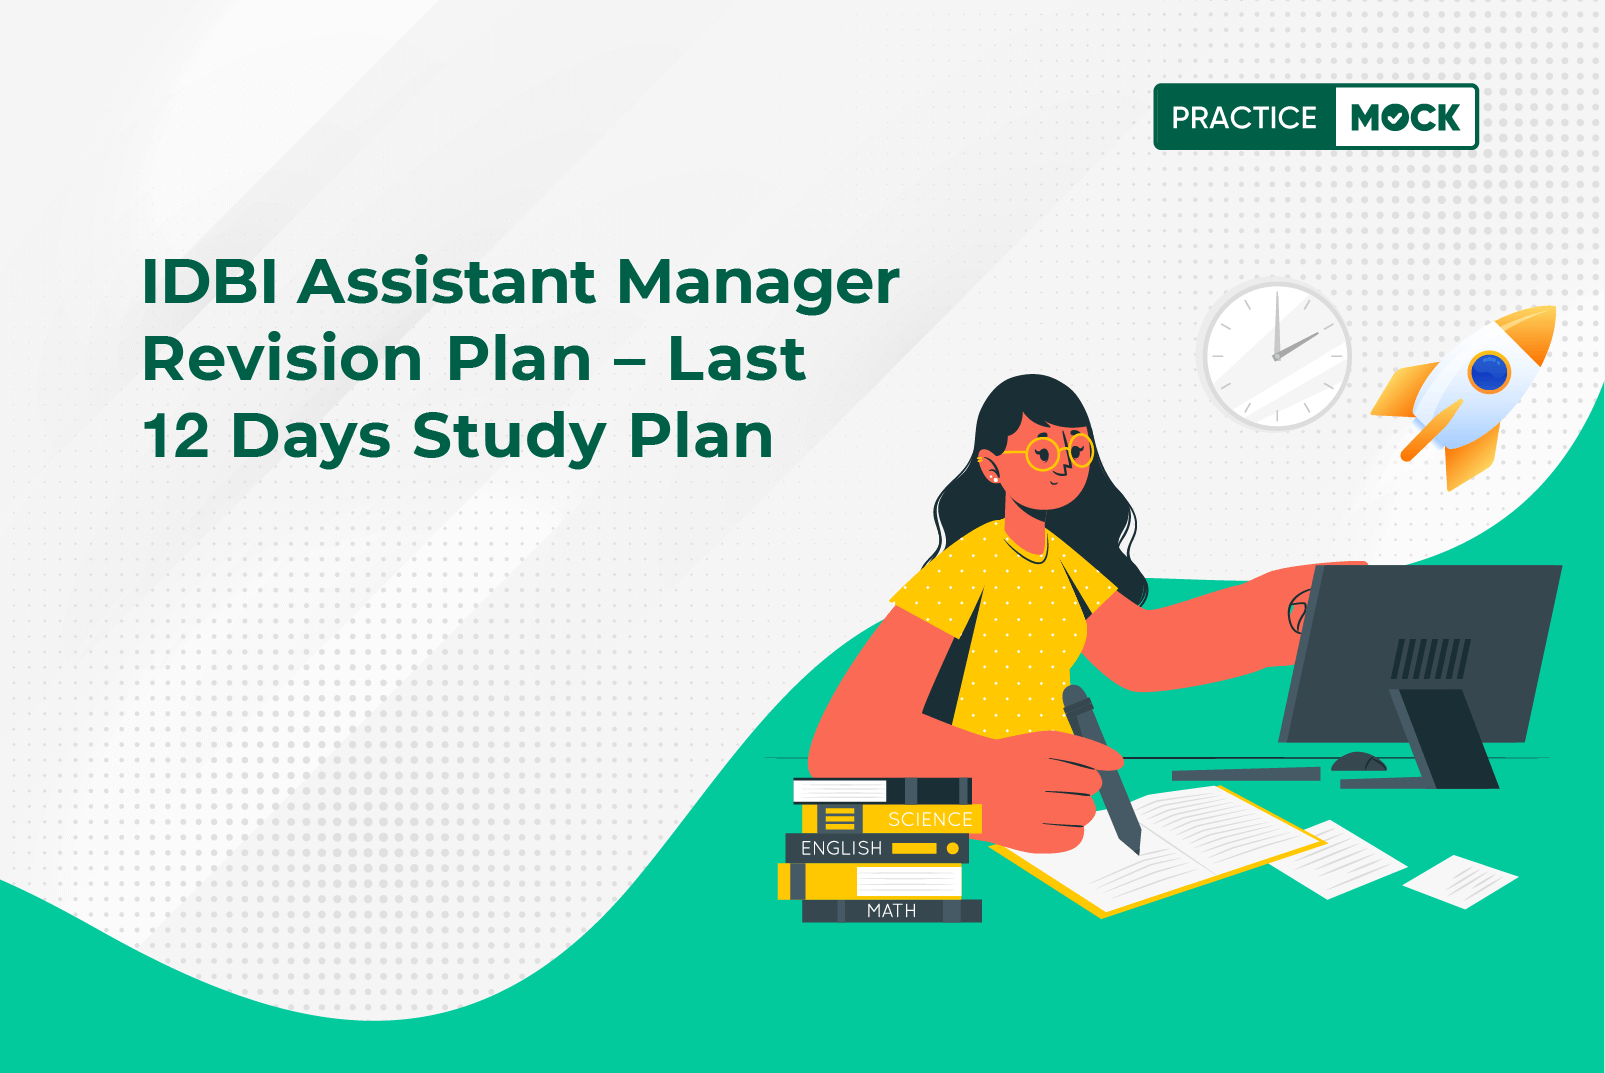 IDBI Assistant Manager Revision Plan